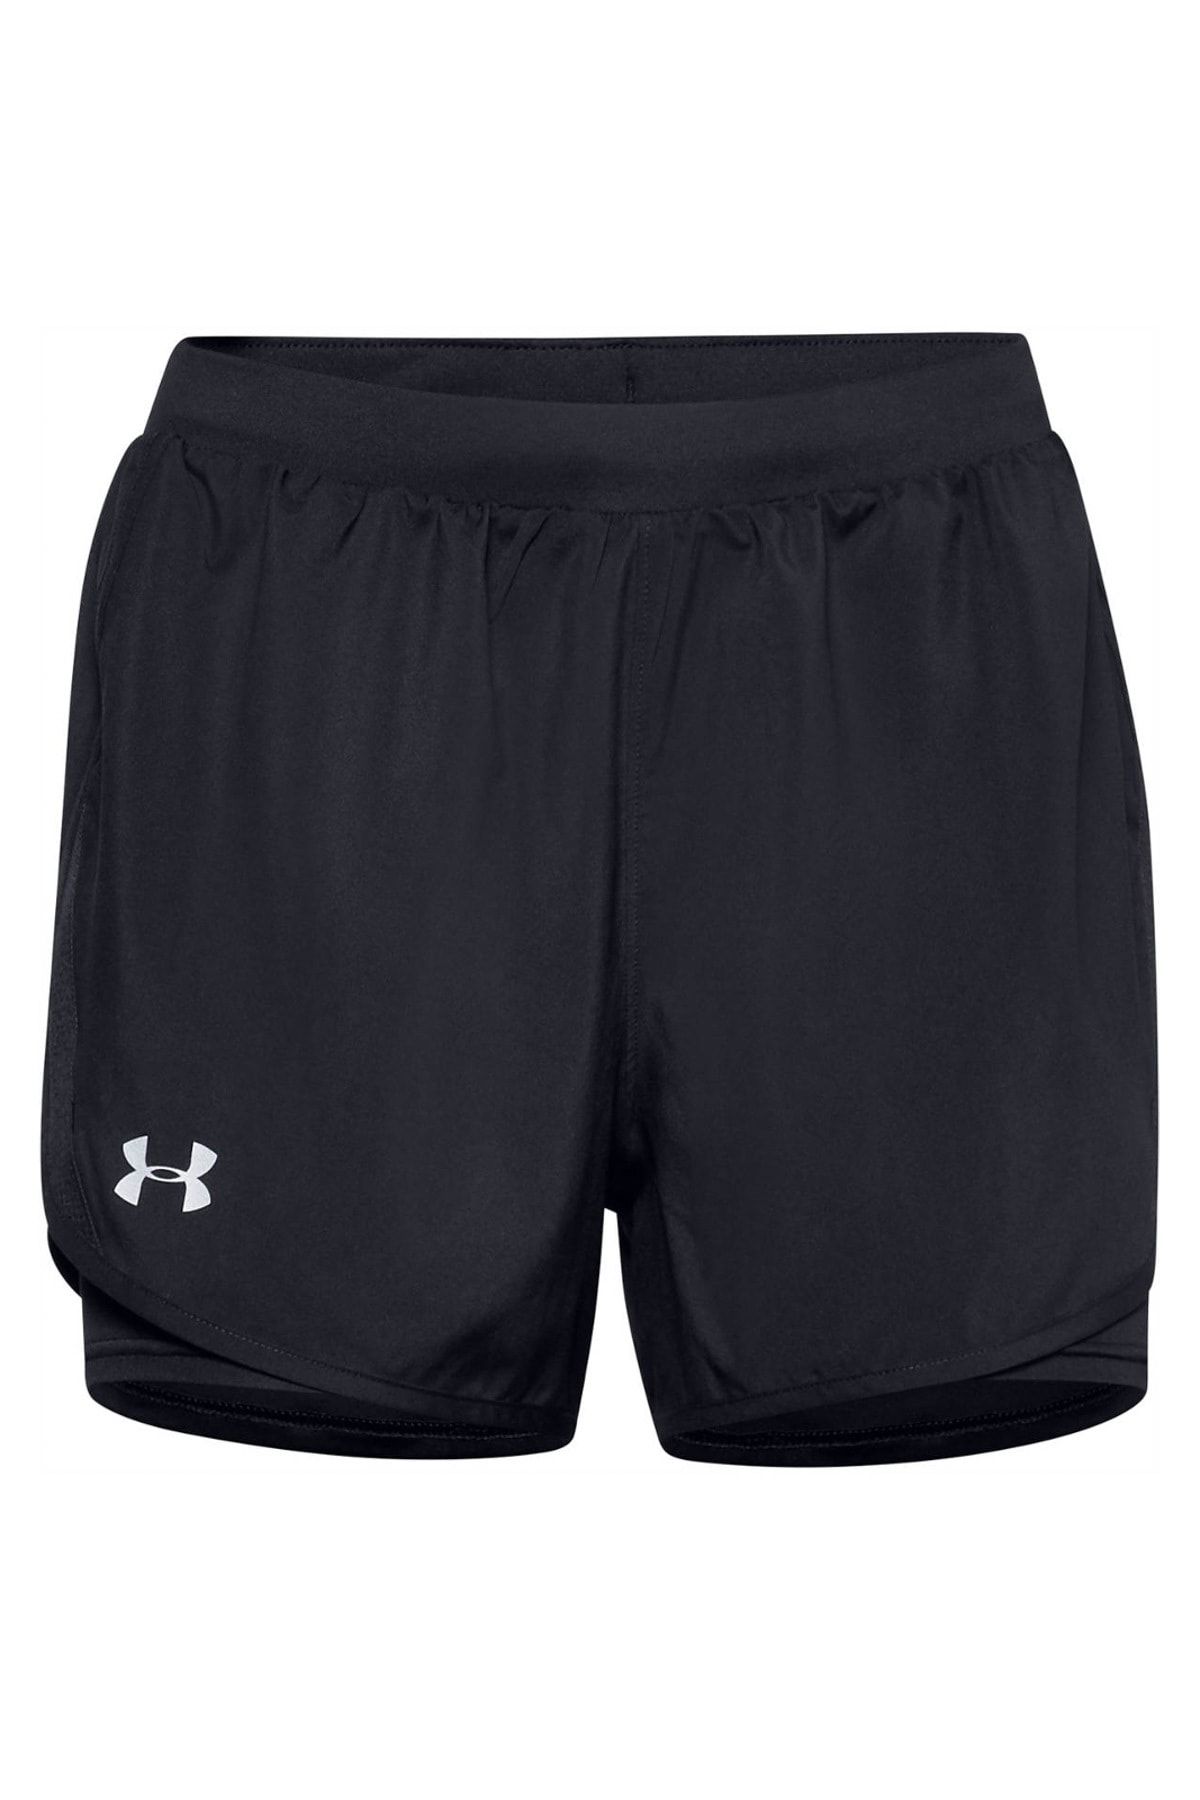 Under Armour Ua Fly By 2.0 2n1 Short 1356200-001